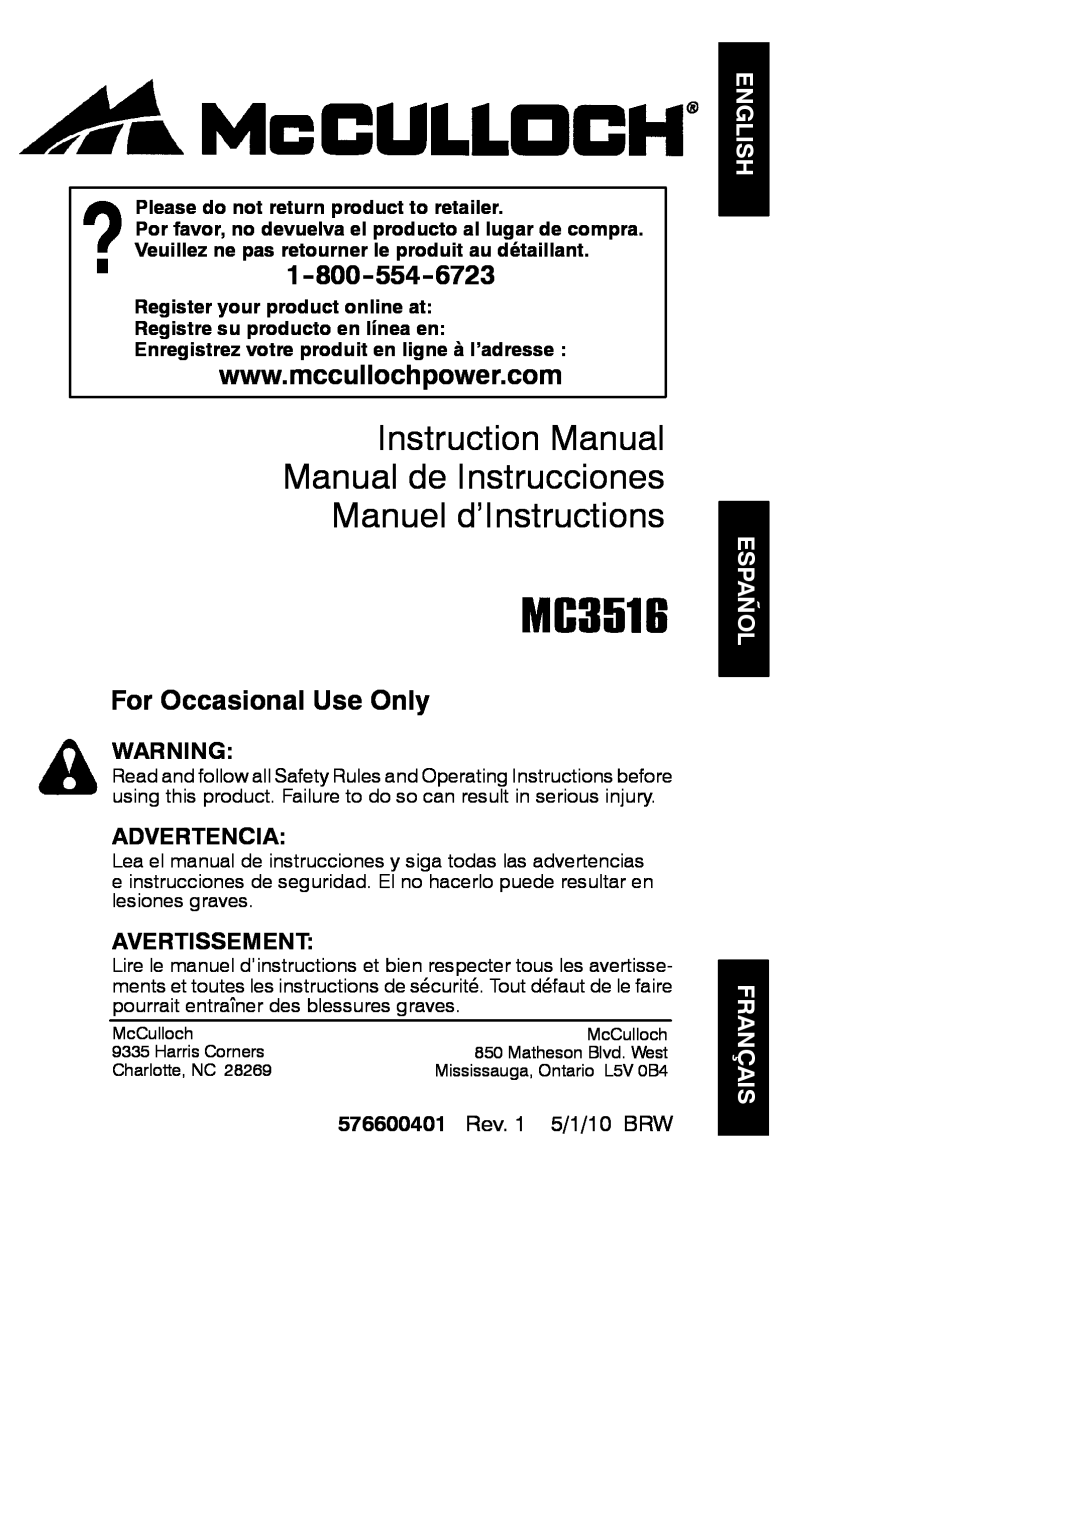 McCulloch MC3516 instruction manual English Español Français, For Occasional Use Only, Advertencia, Avertissement 